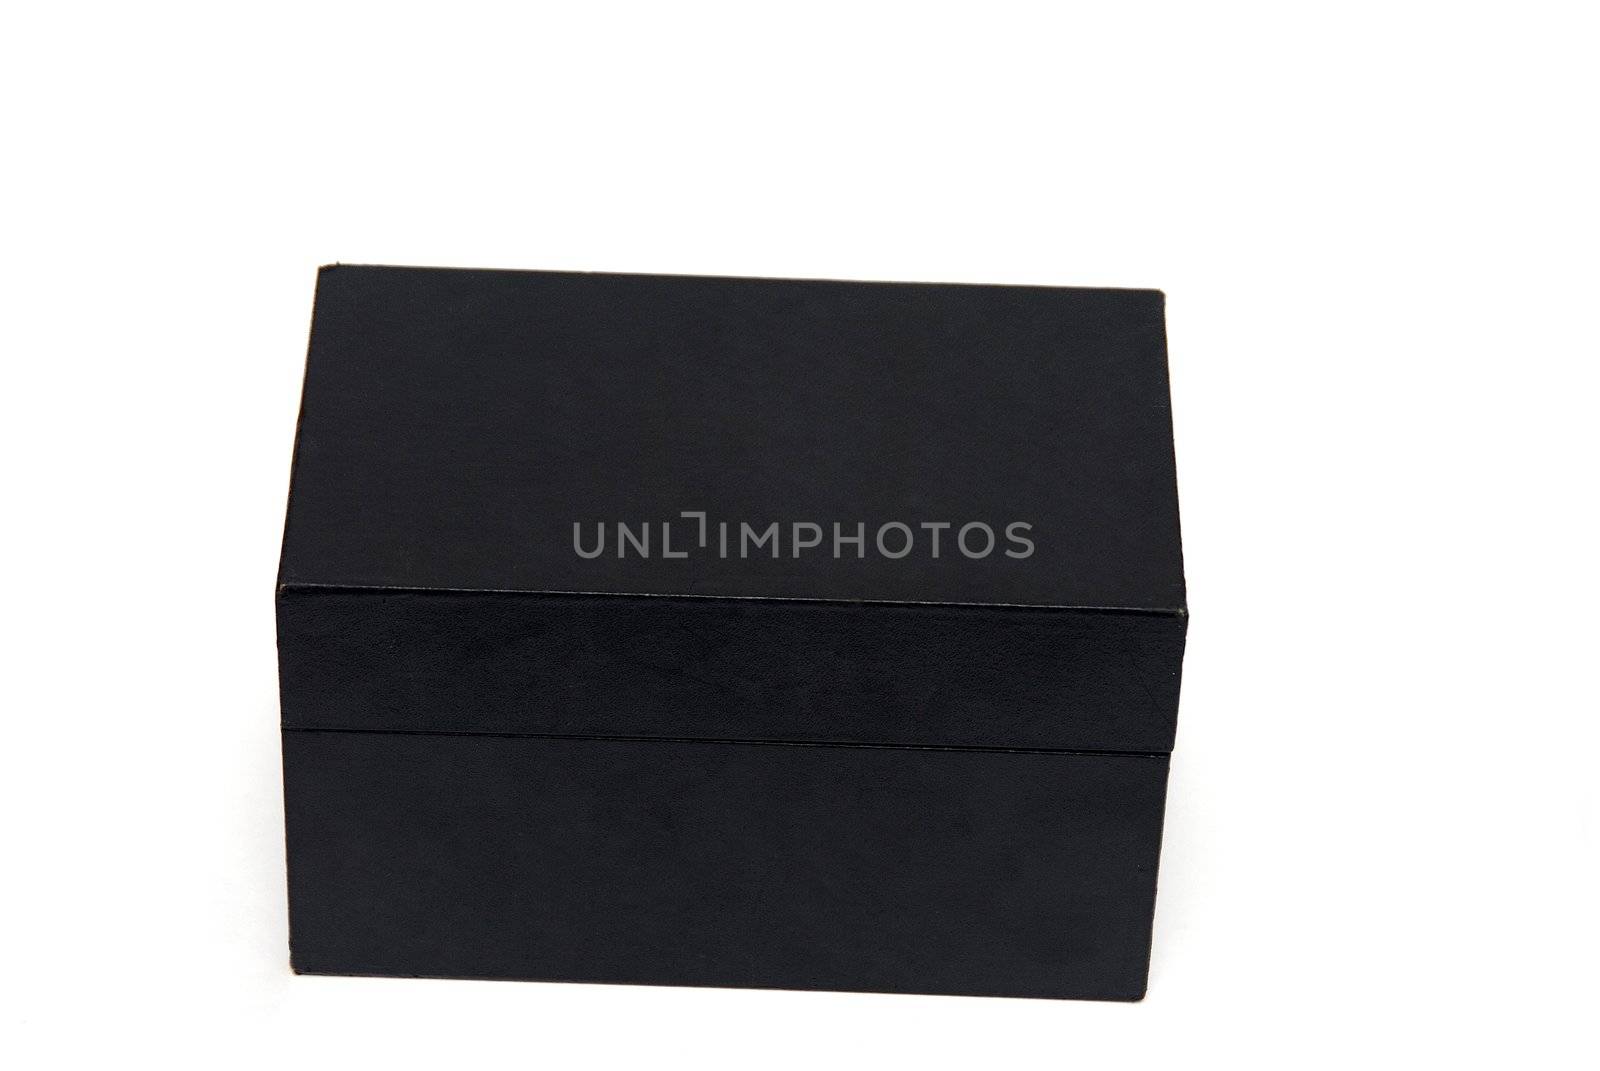 A black box isolated on a white background